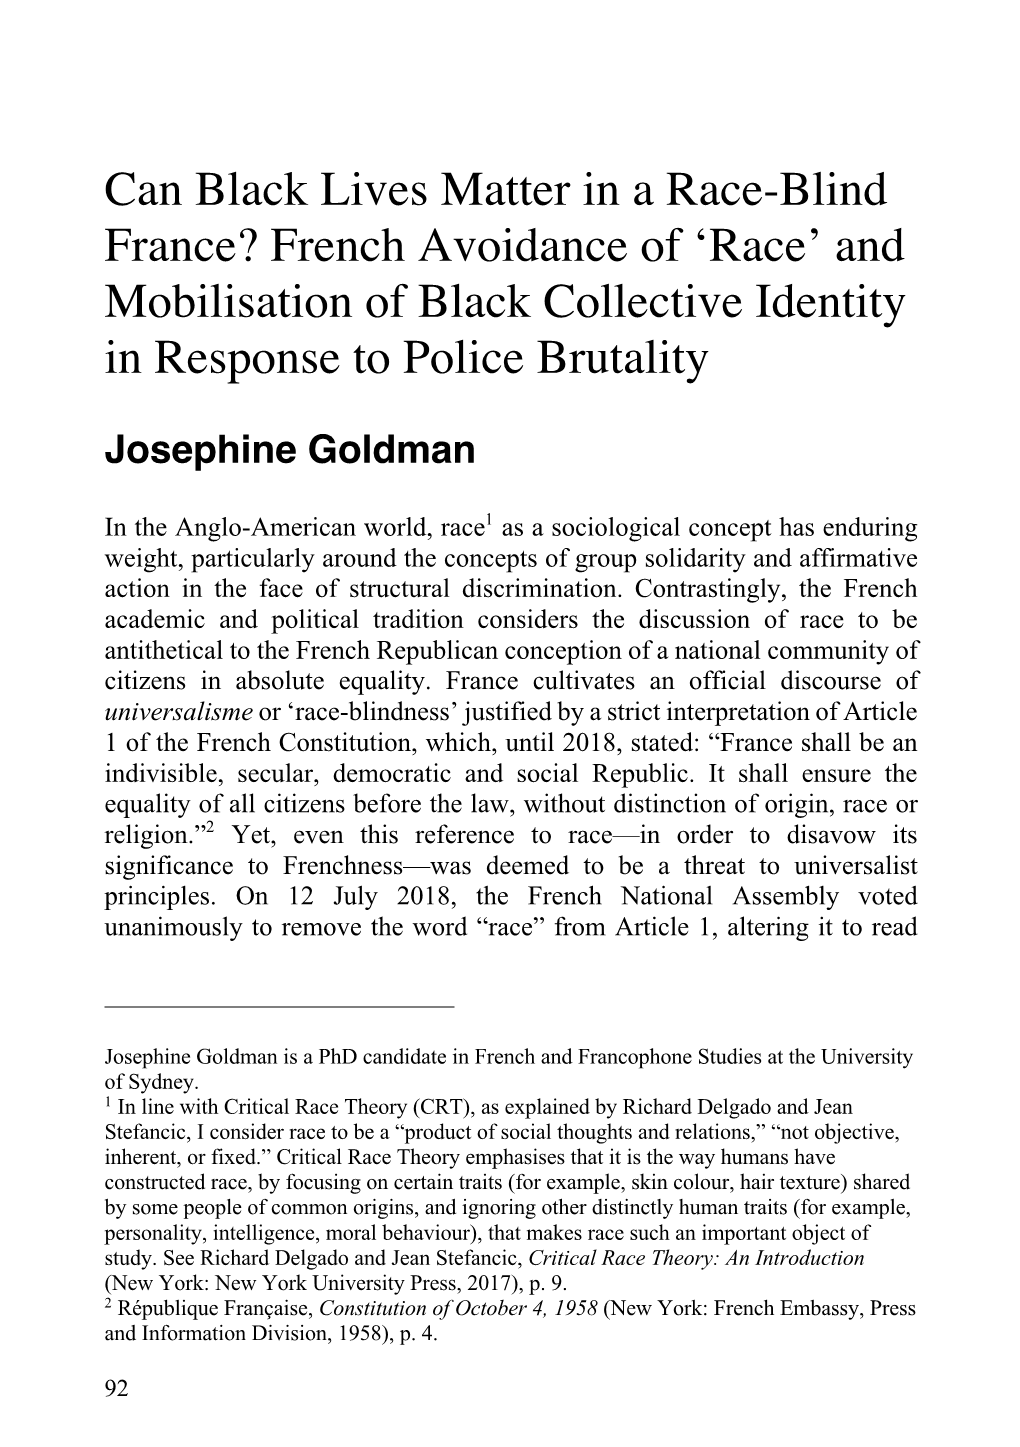 Can Black Lives Matter in a Race-Blind France? French Avoidance of ‘Race’ and Mobilisation of Black Collective Identity in Response to Police Brutality